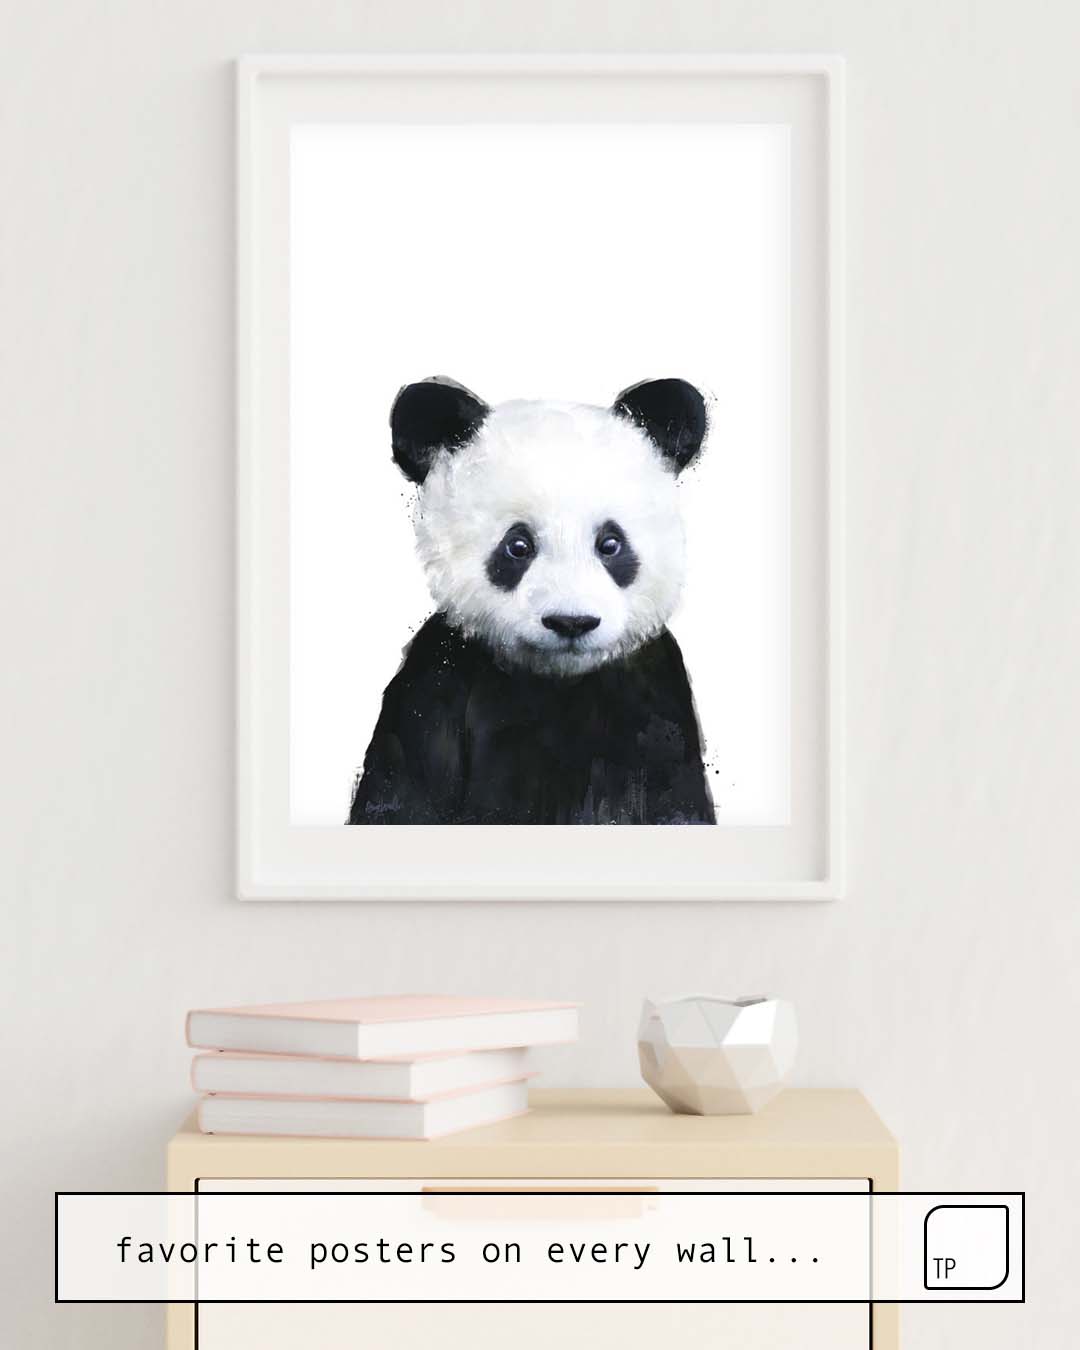 The photo shows an example of furnishing with the motif LITTLE PANDA by Amy Hamilton as mural